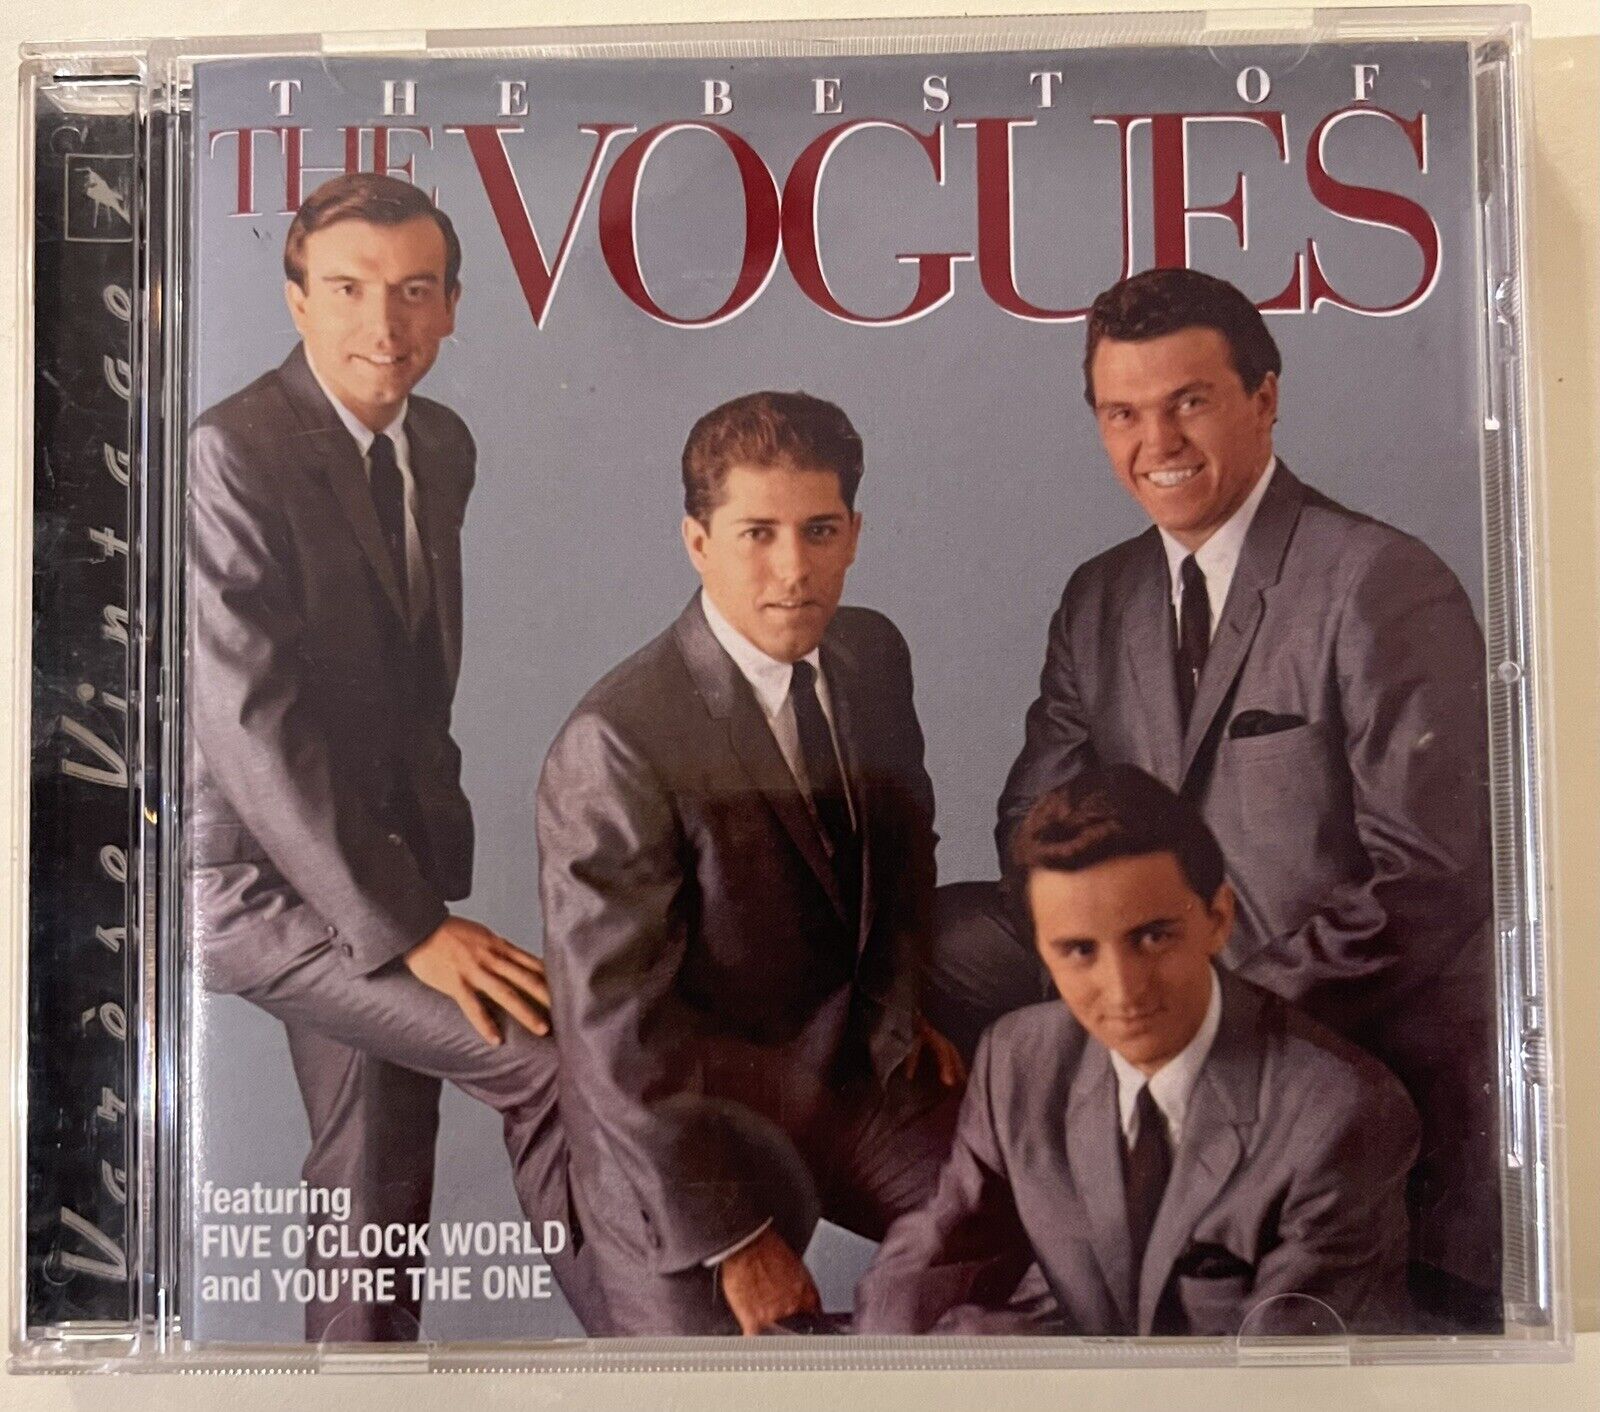 The Best Of by The Vogues (CD, 2006)